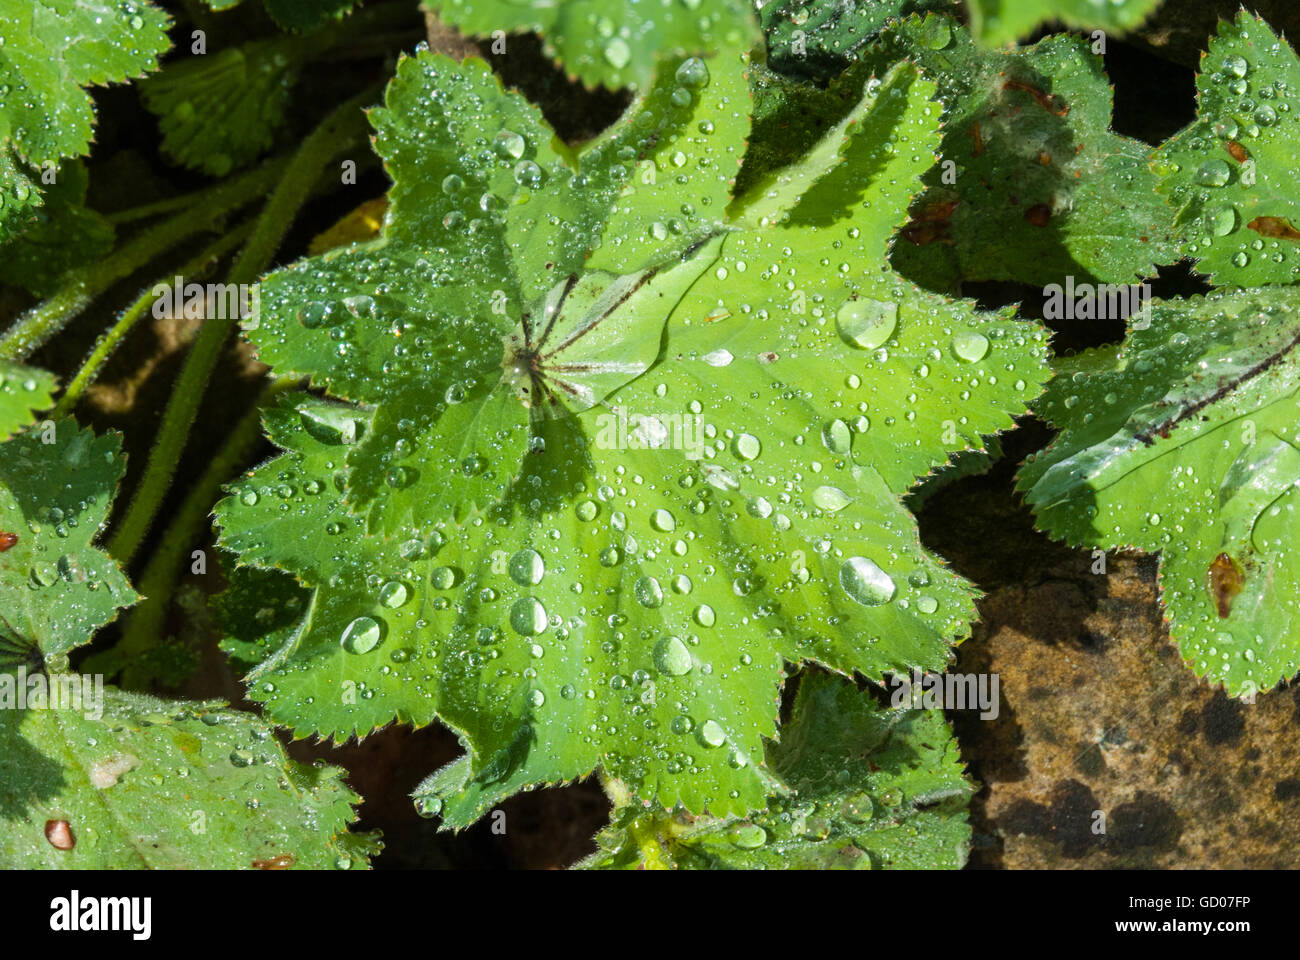 Leaves of Common Lady's Mantle with water drops on the upper surface Stock Photo